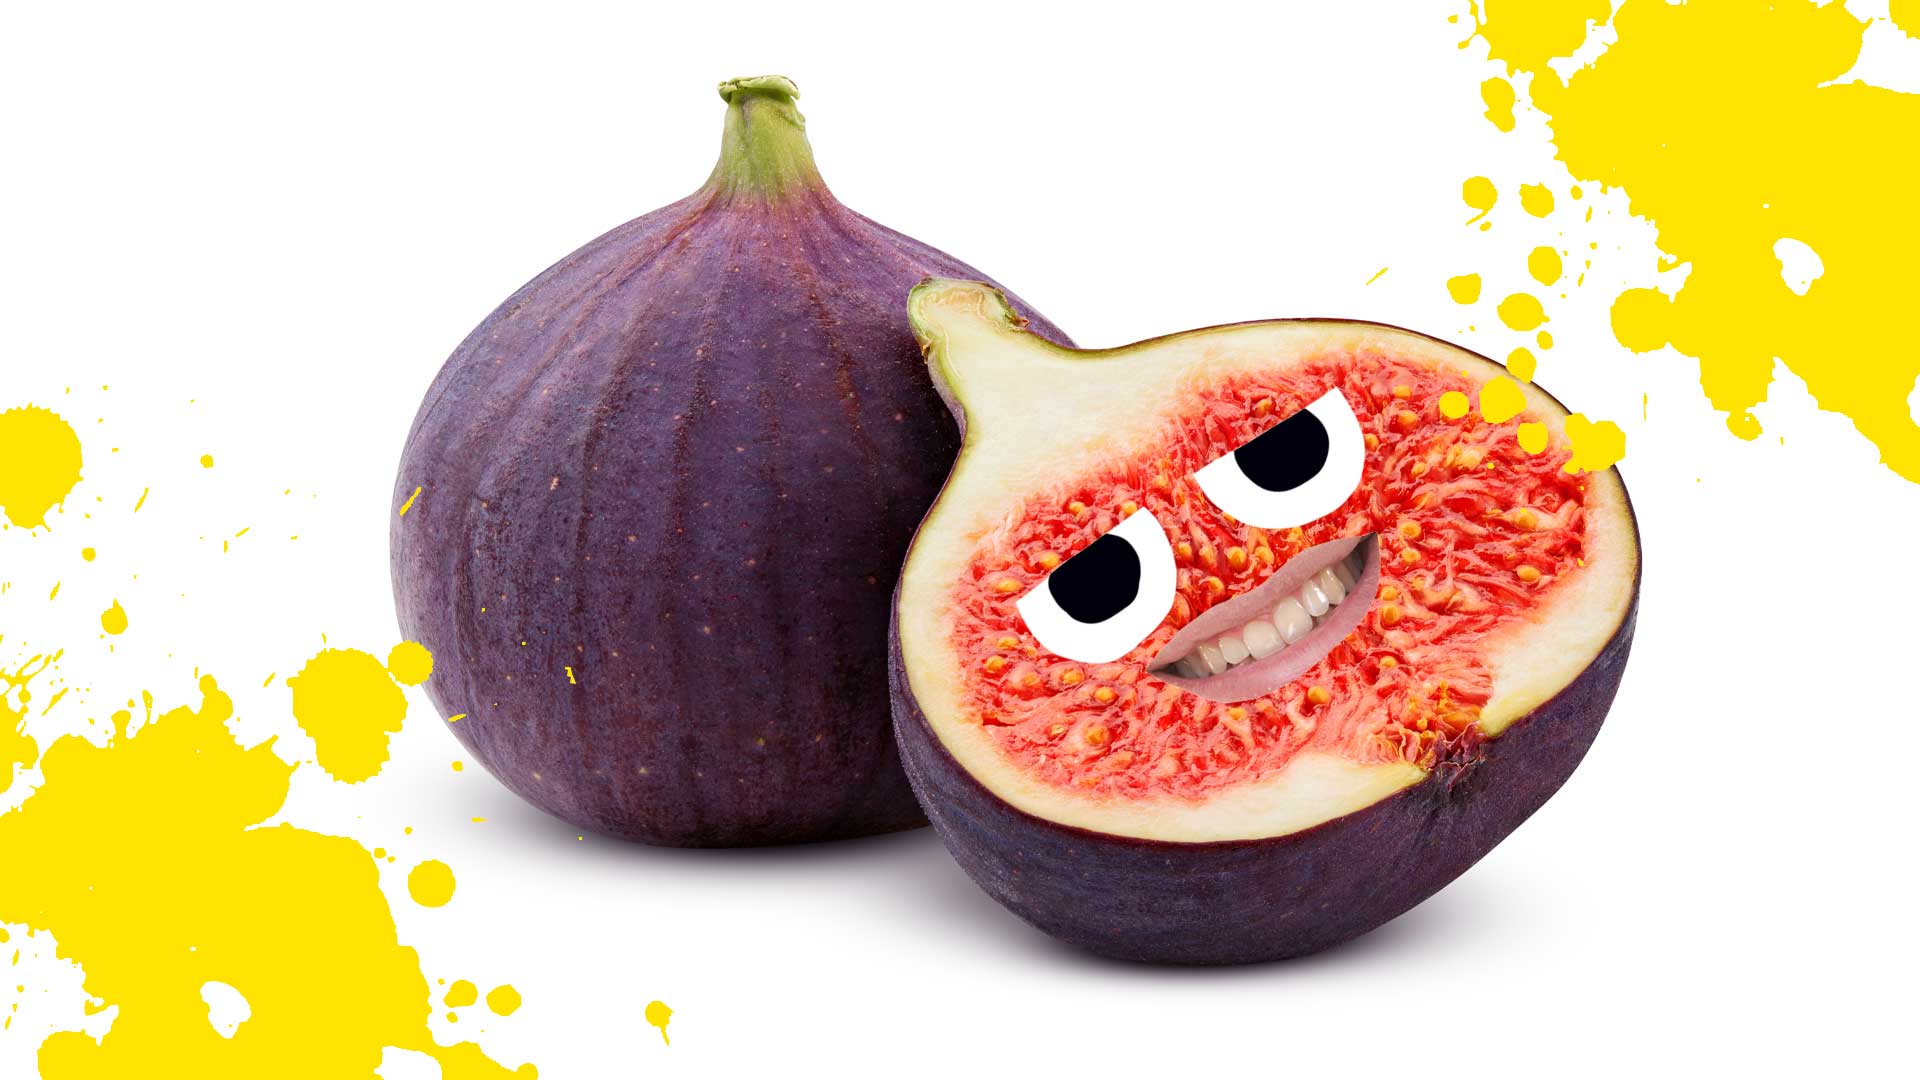 Two delicious figs